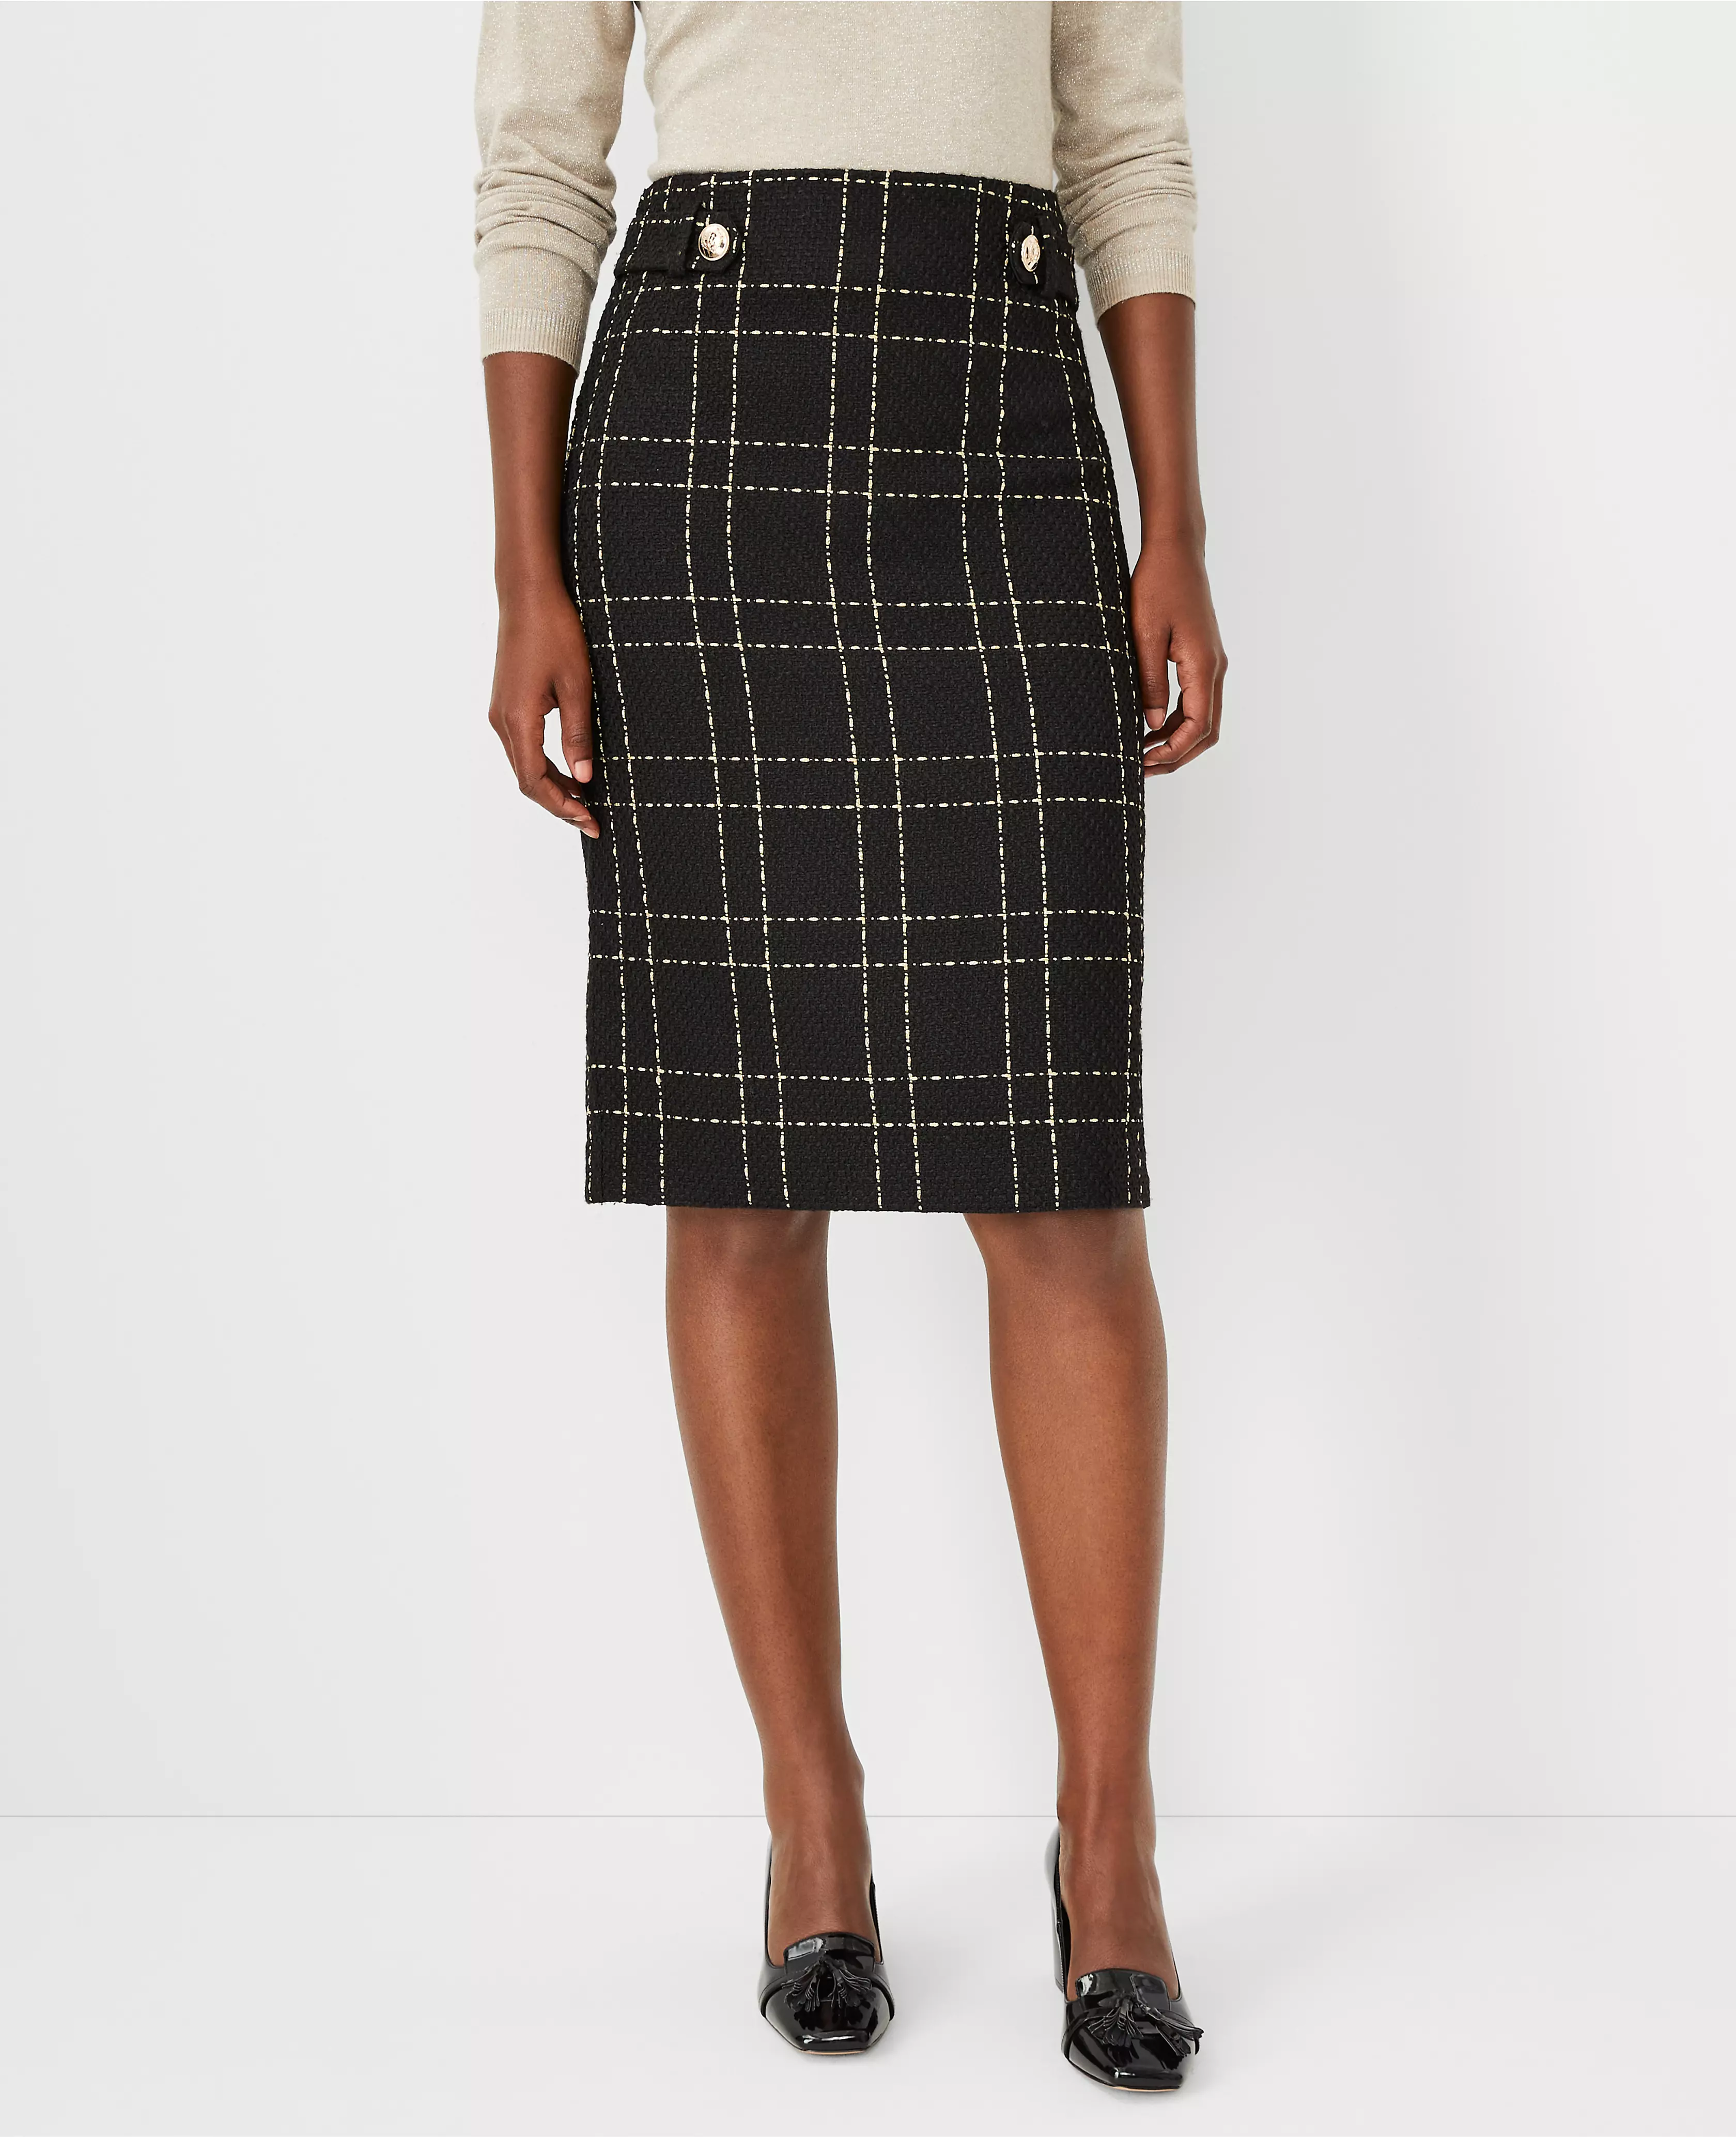 Shimmer Tweed Button Tab Pencil Skirt